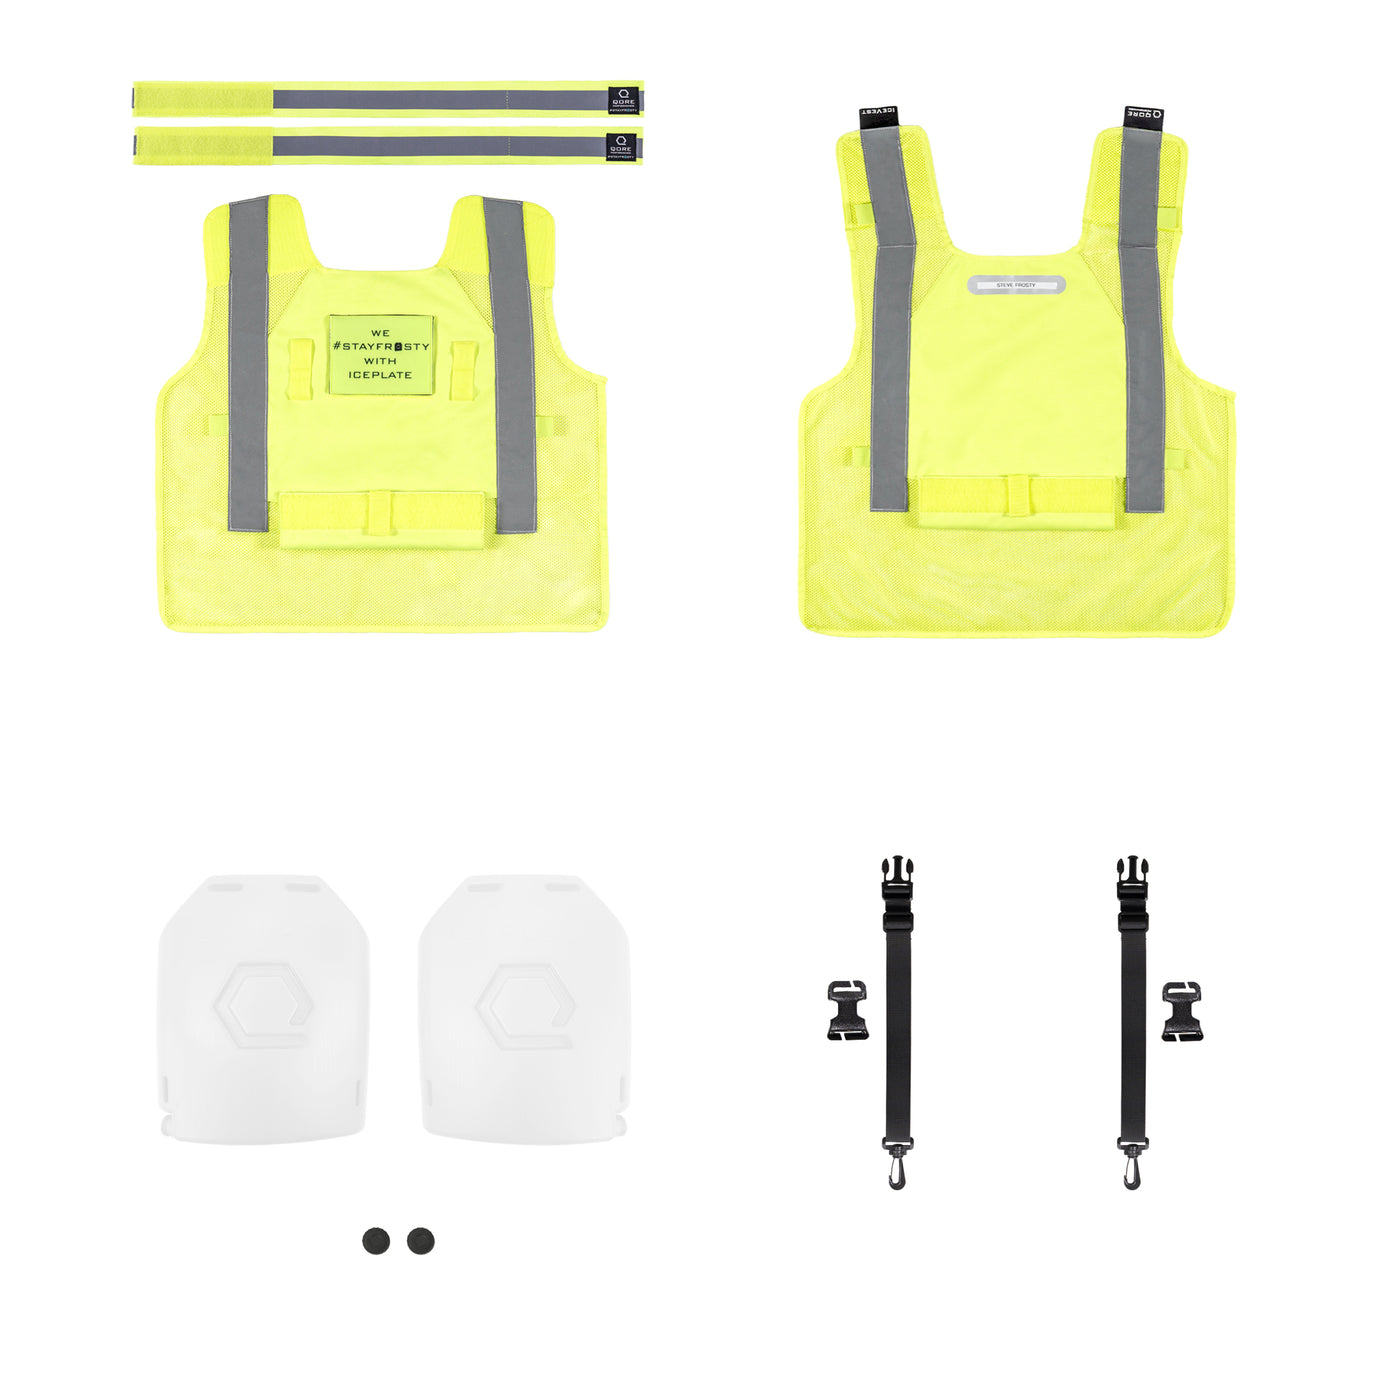 ICEVEST HiVis Cooling / Heating / Hydration Safety Vest Class 2 (Type R)